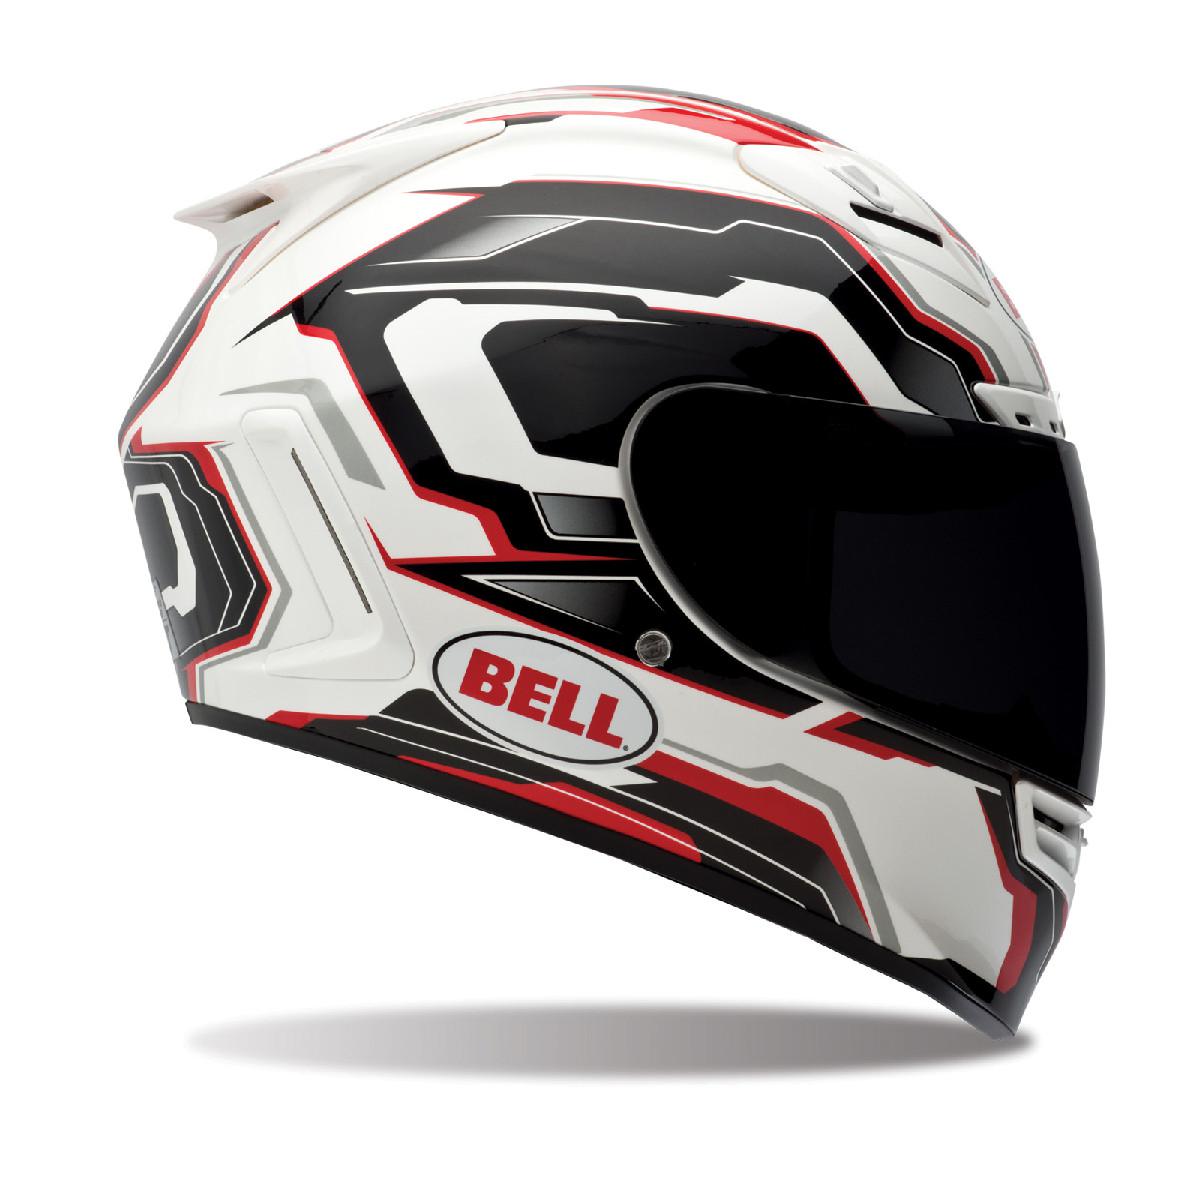 Free 2-day shipping! bell star spirit red white xs-2xl motorcycle race helmet